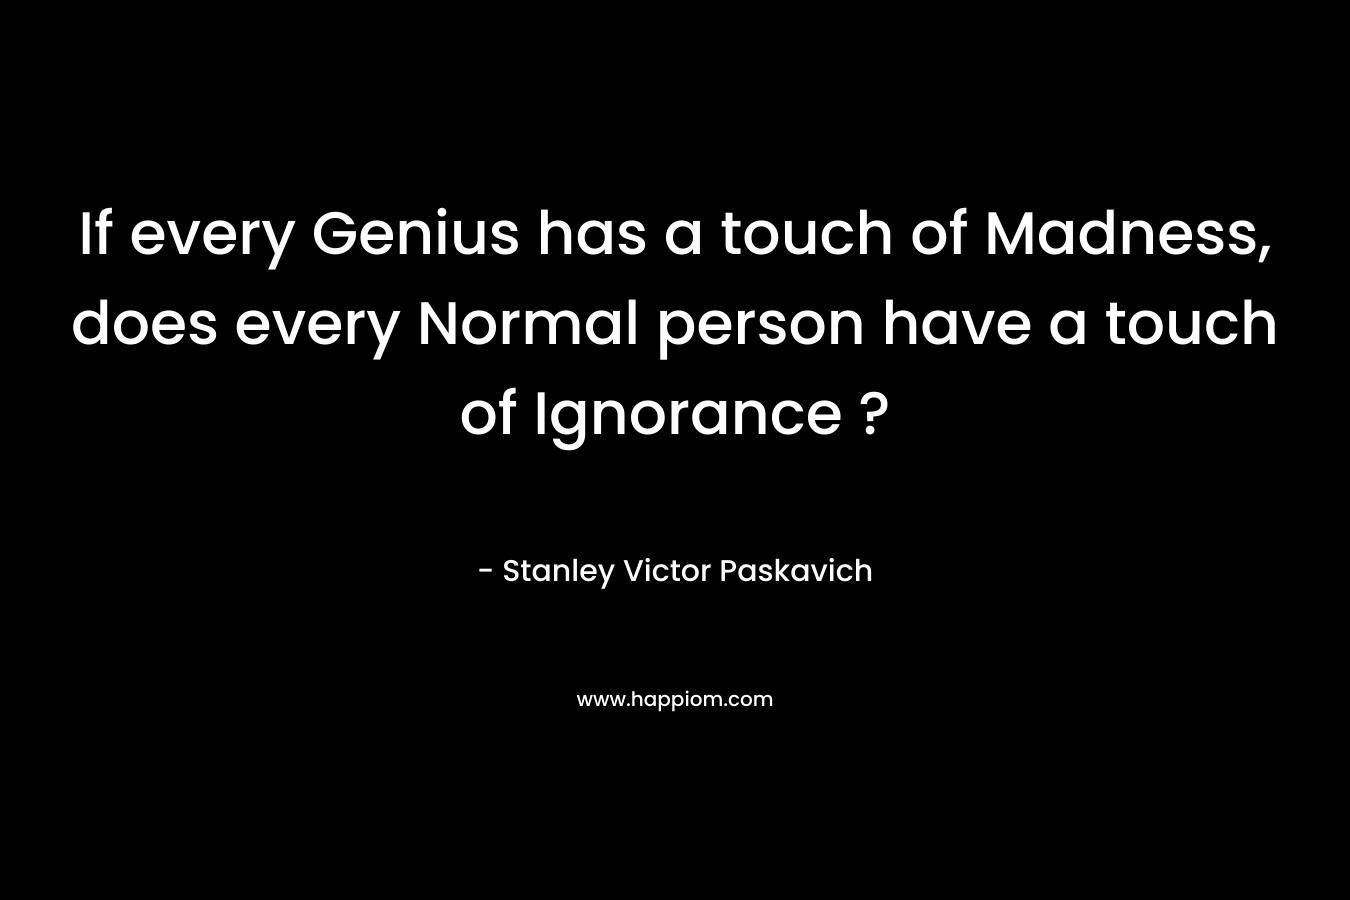 If every Genius has a touch of Madness, does every Normal person have a touch of Ignorance ?